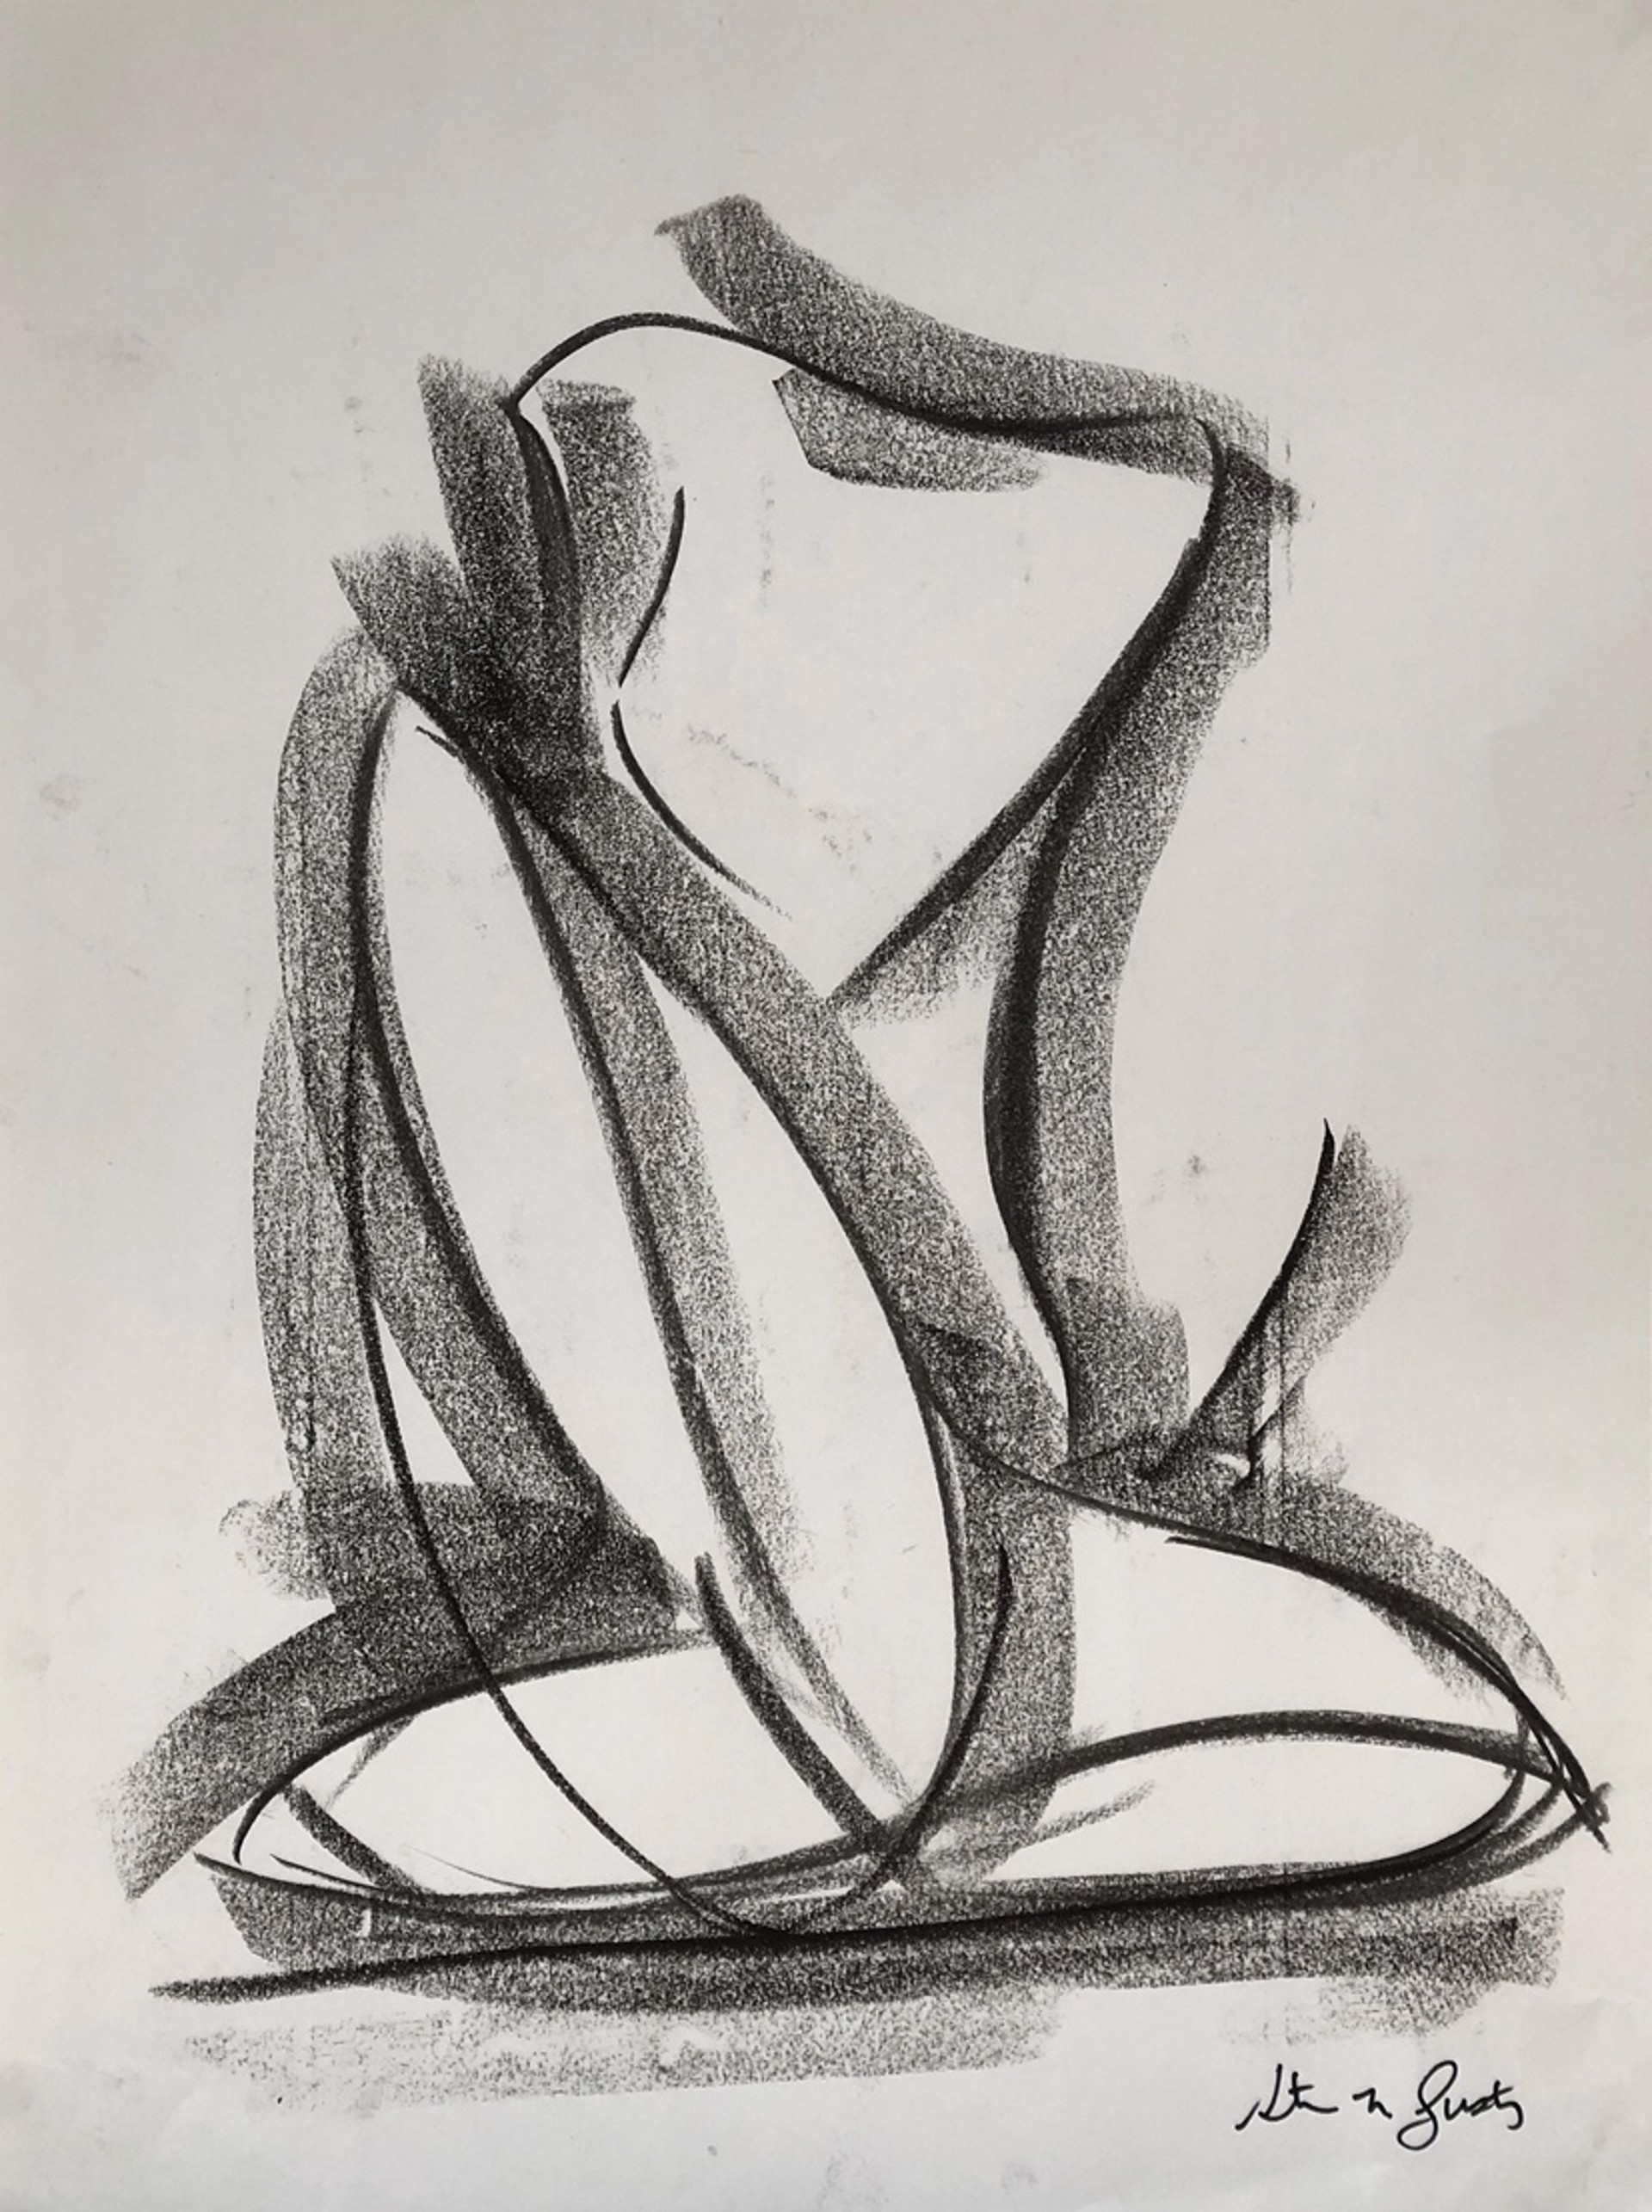 Untitled (Drawing for Sculpture) by Steven Lustig